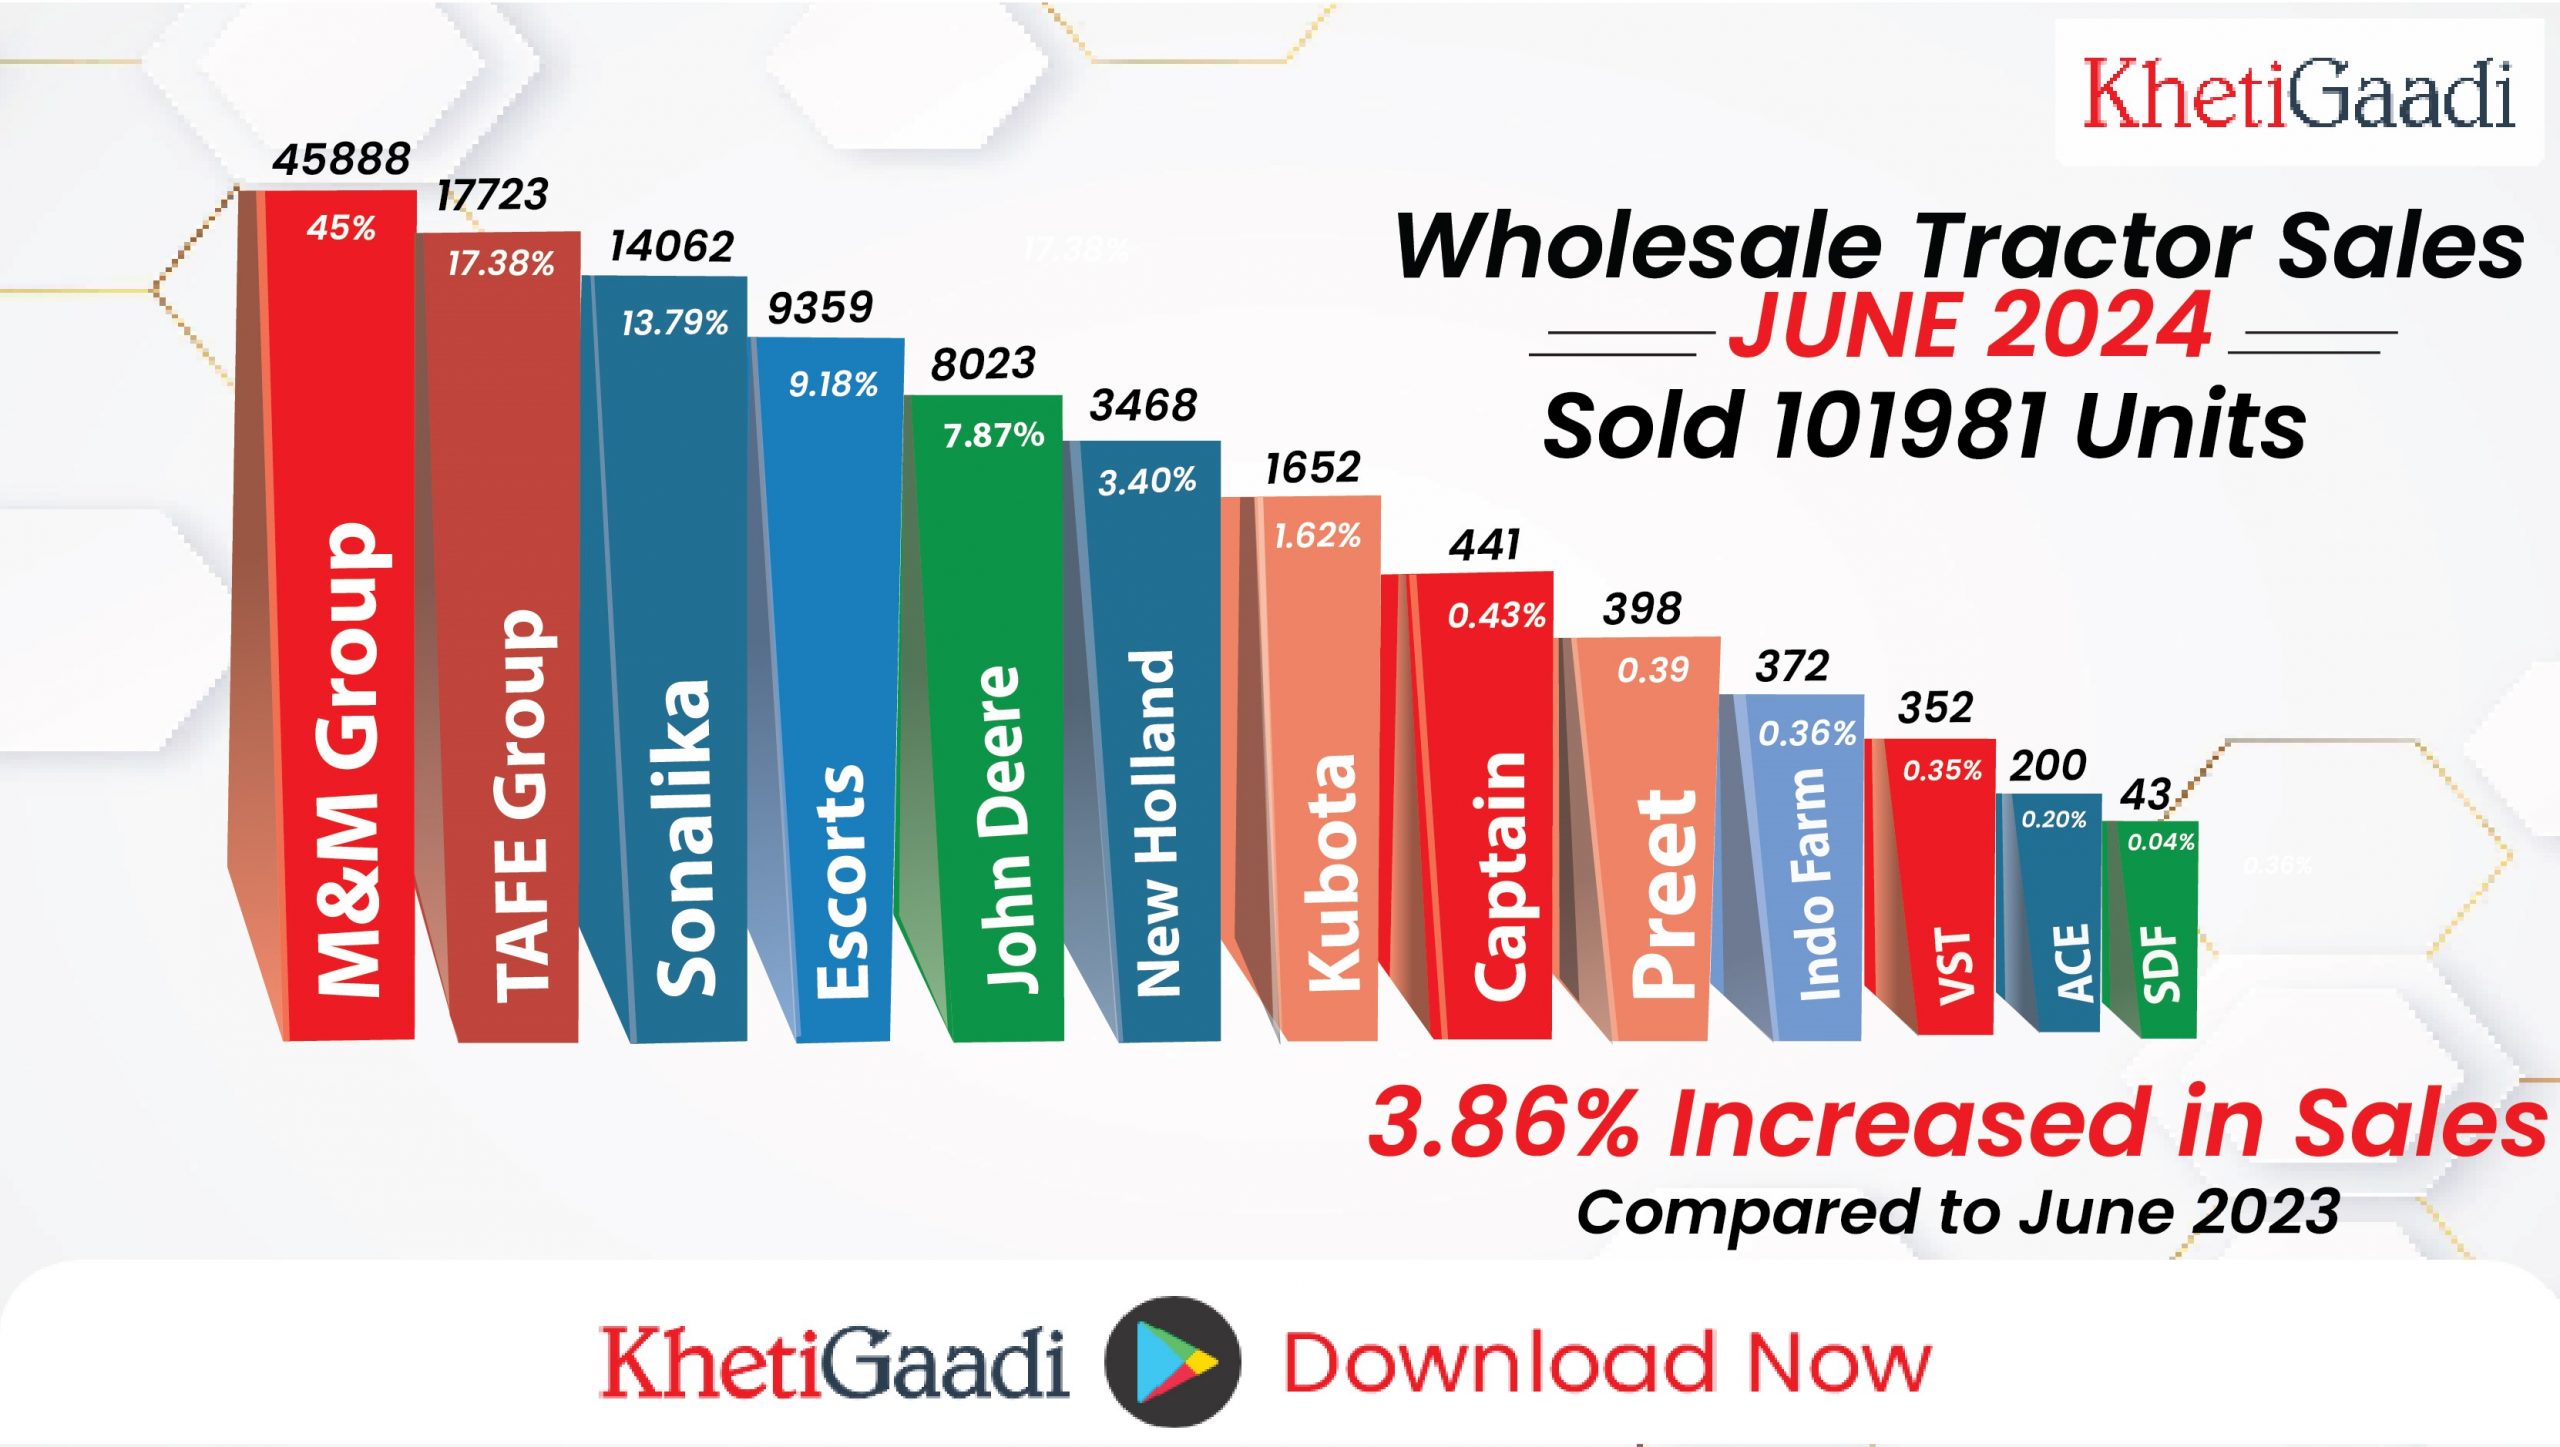 Domestic Tractor Sales Report June 2024: 3.86% Increase in Sales, 101,981 Units Sold